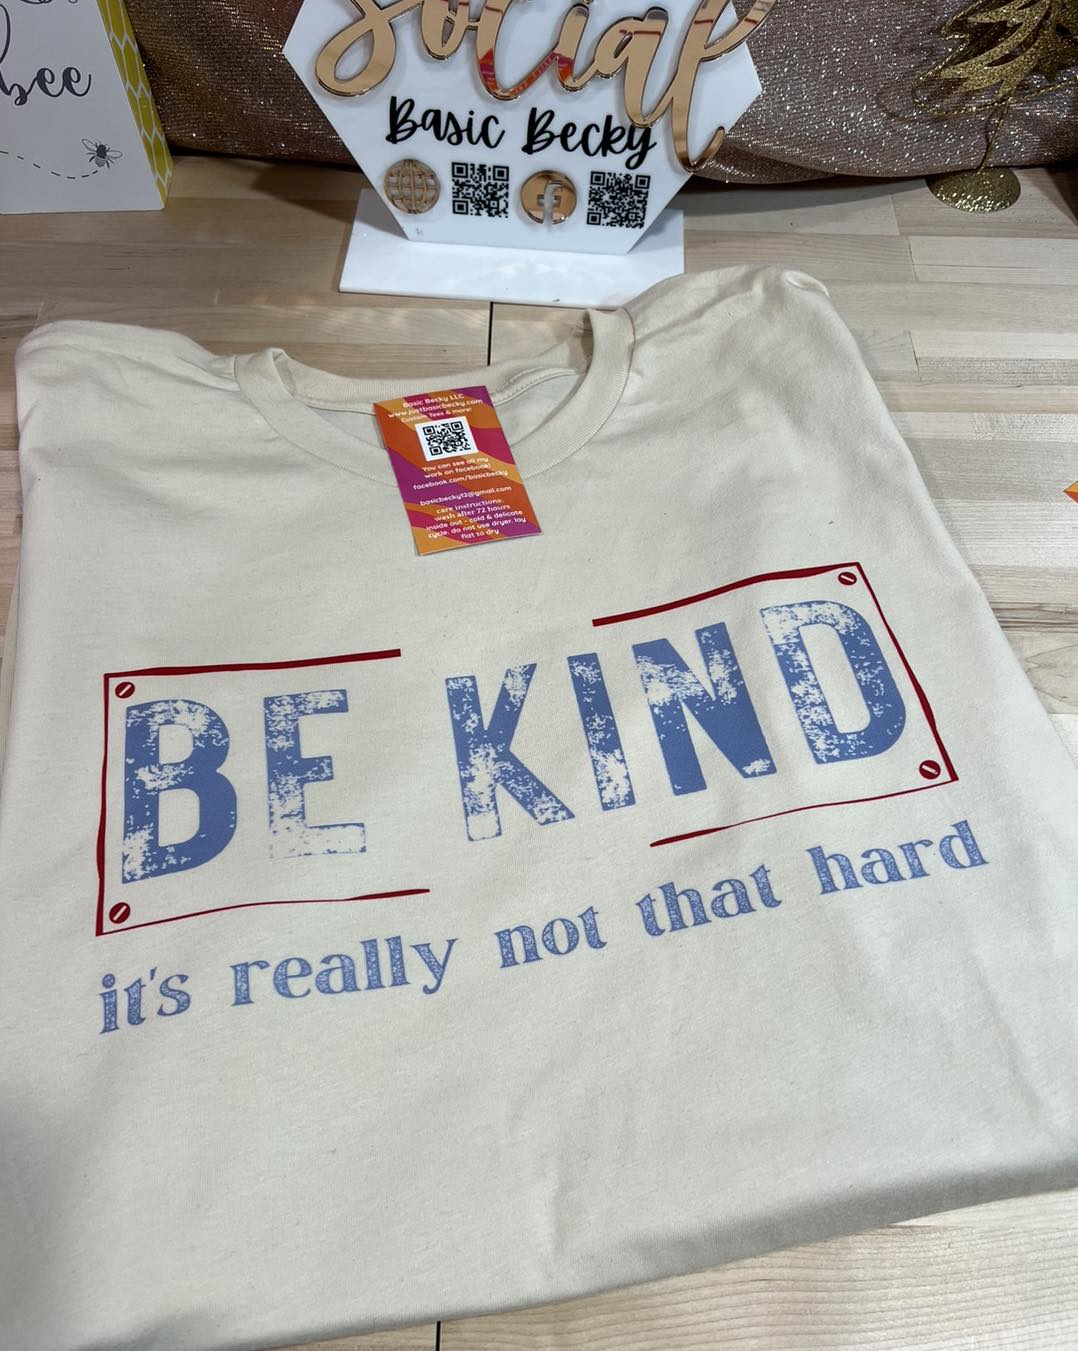 BE KIND IT'S REALLY NOT THAT HARD